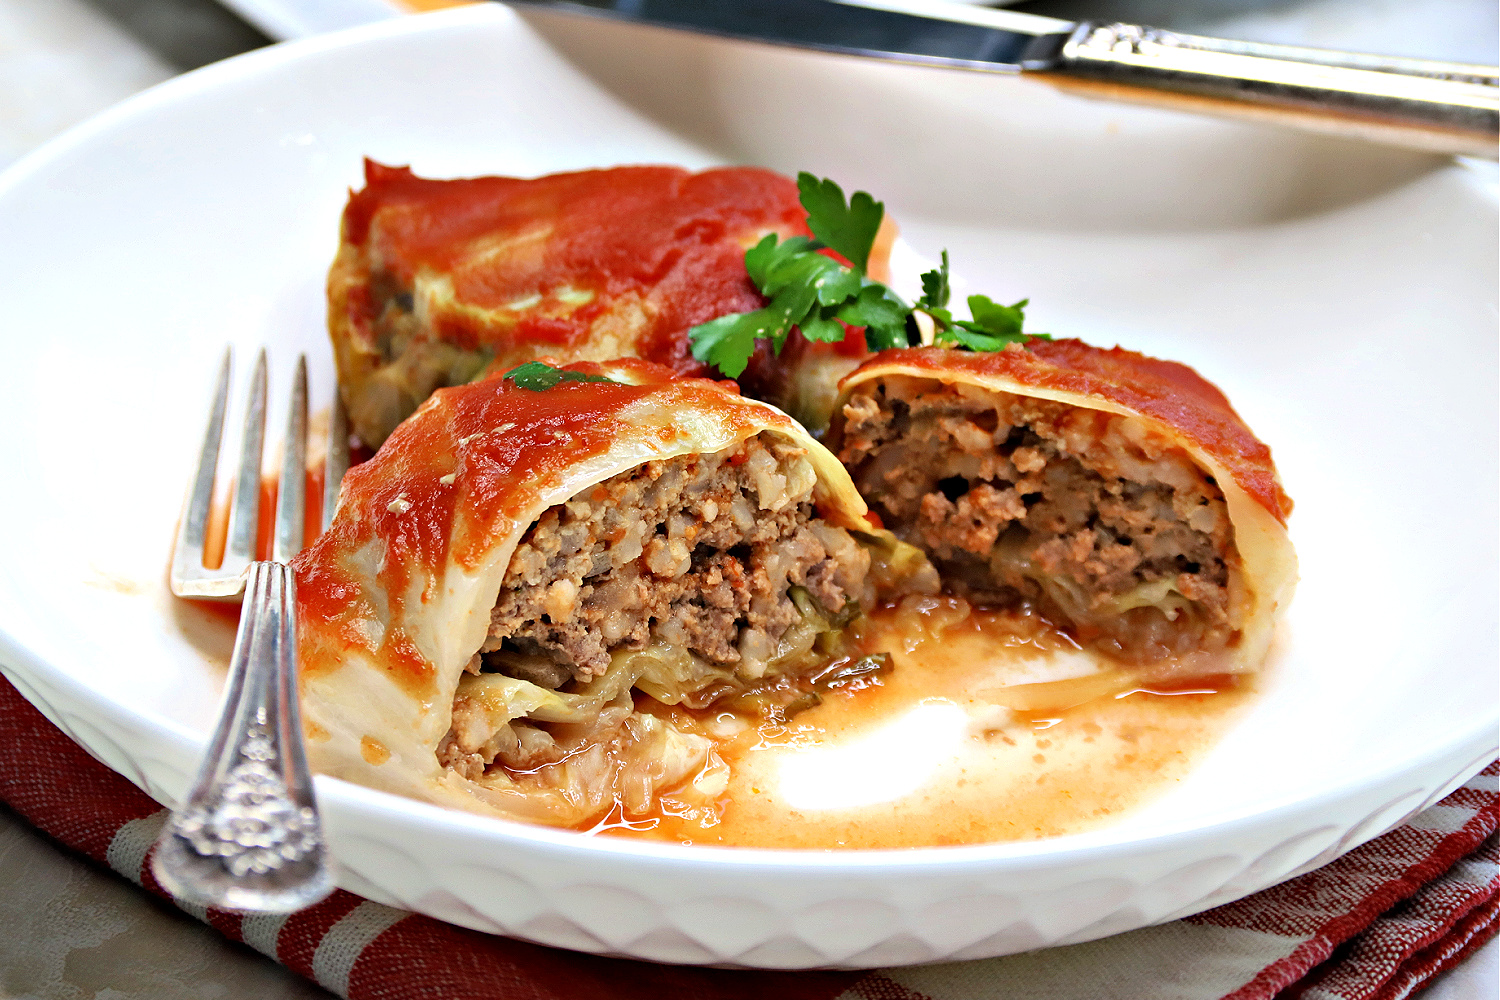 Easy slow cooker recipe for Swedish cabbage rolls filled with ground beef and rice in a tasty sauce is a comforting and satisfying dinner meal.